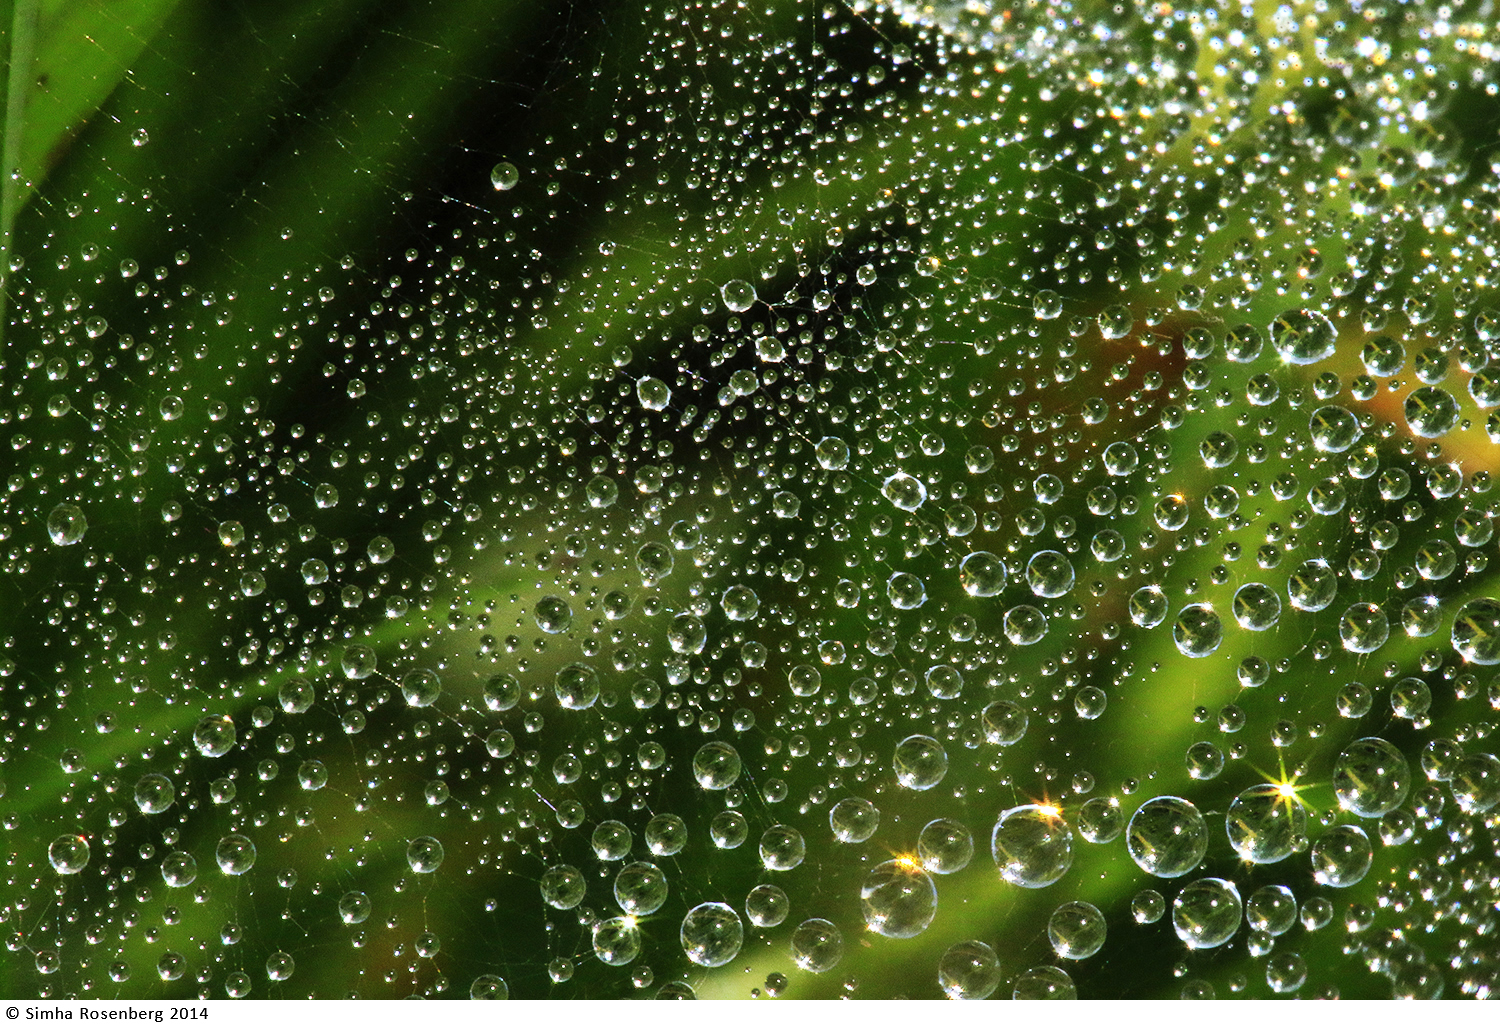 This photo of a dew spangled web symbolizes how dazzling nonprofit websites can be when they have a clear structure and smart design.